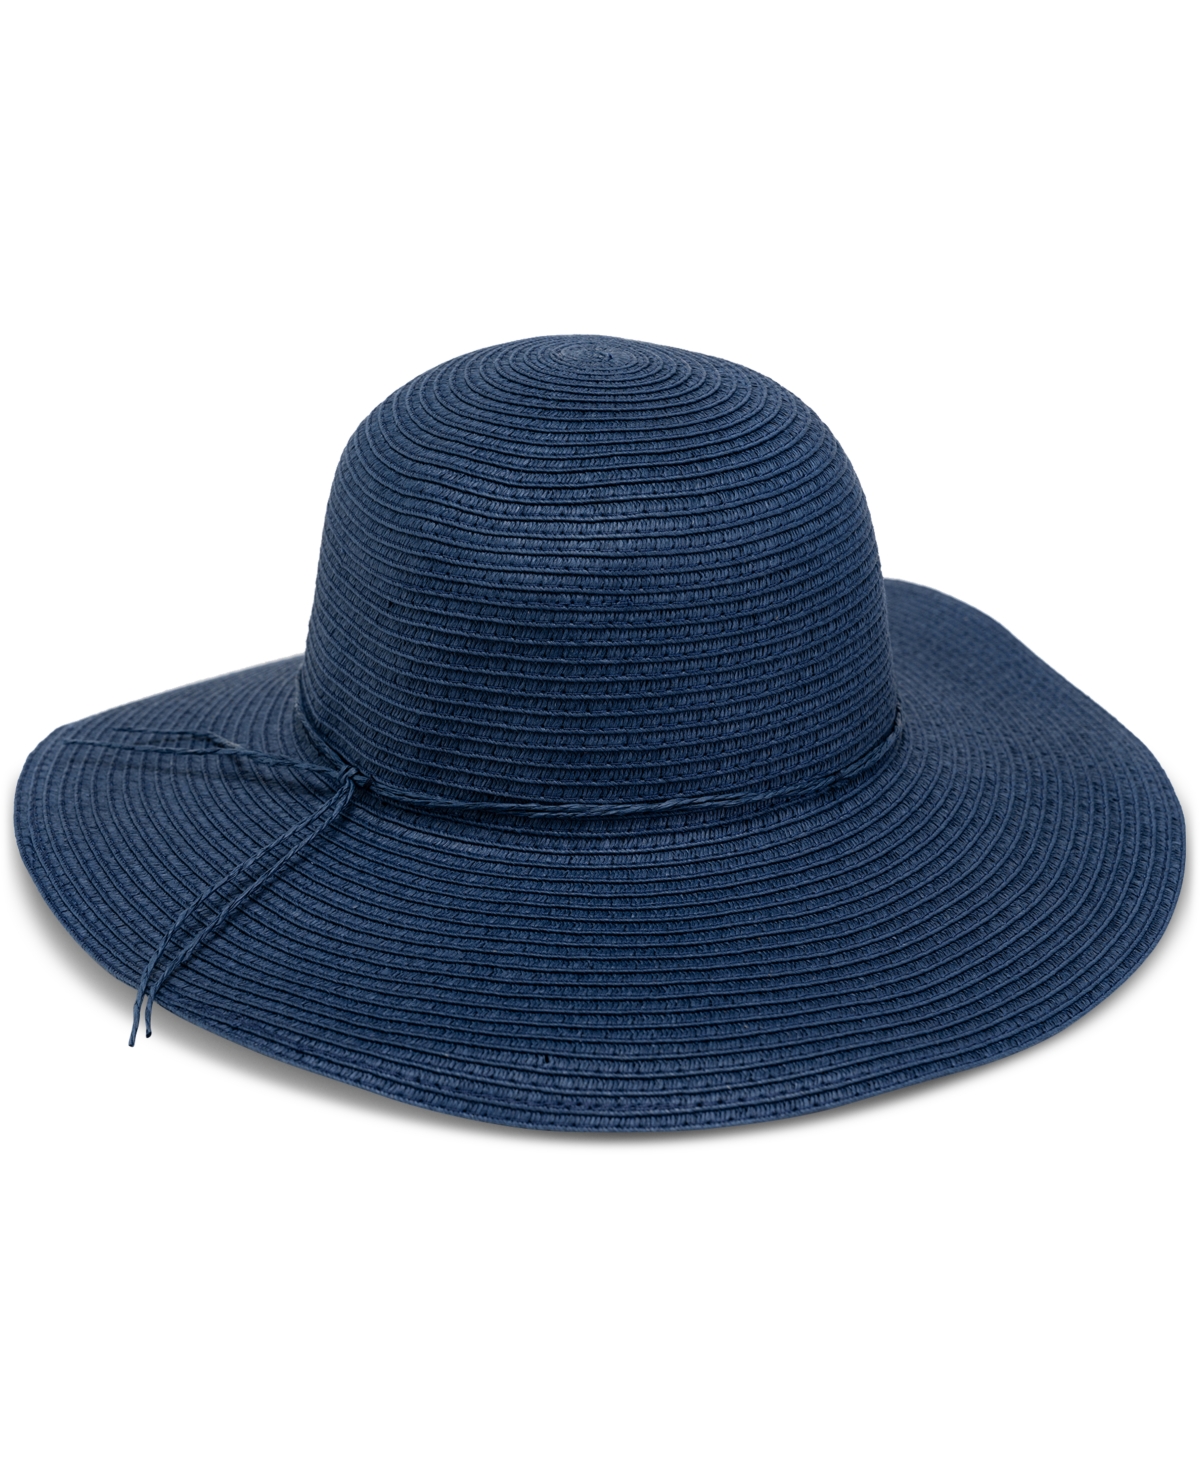 Style & Co Packable Paper Floppy Hat In Navy